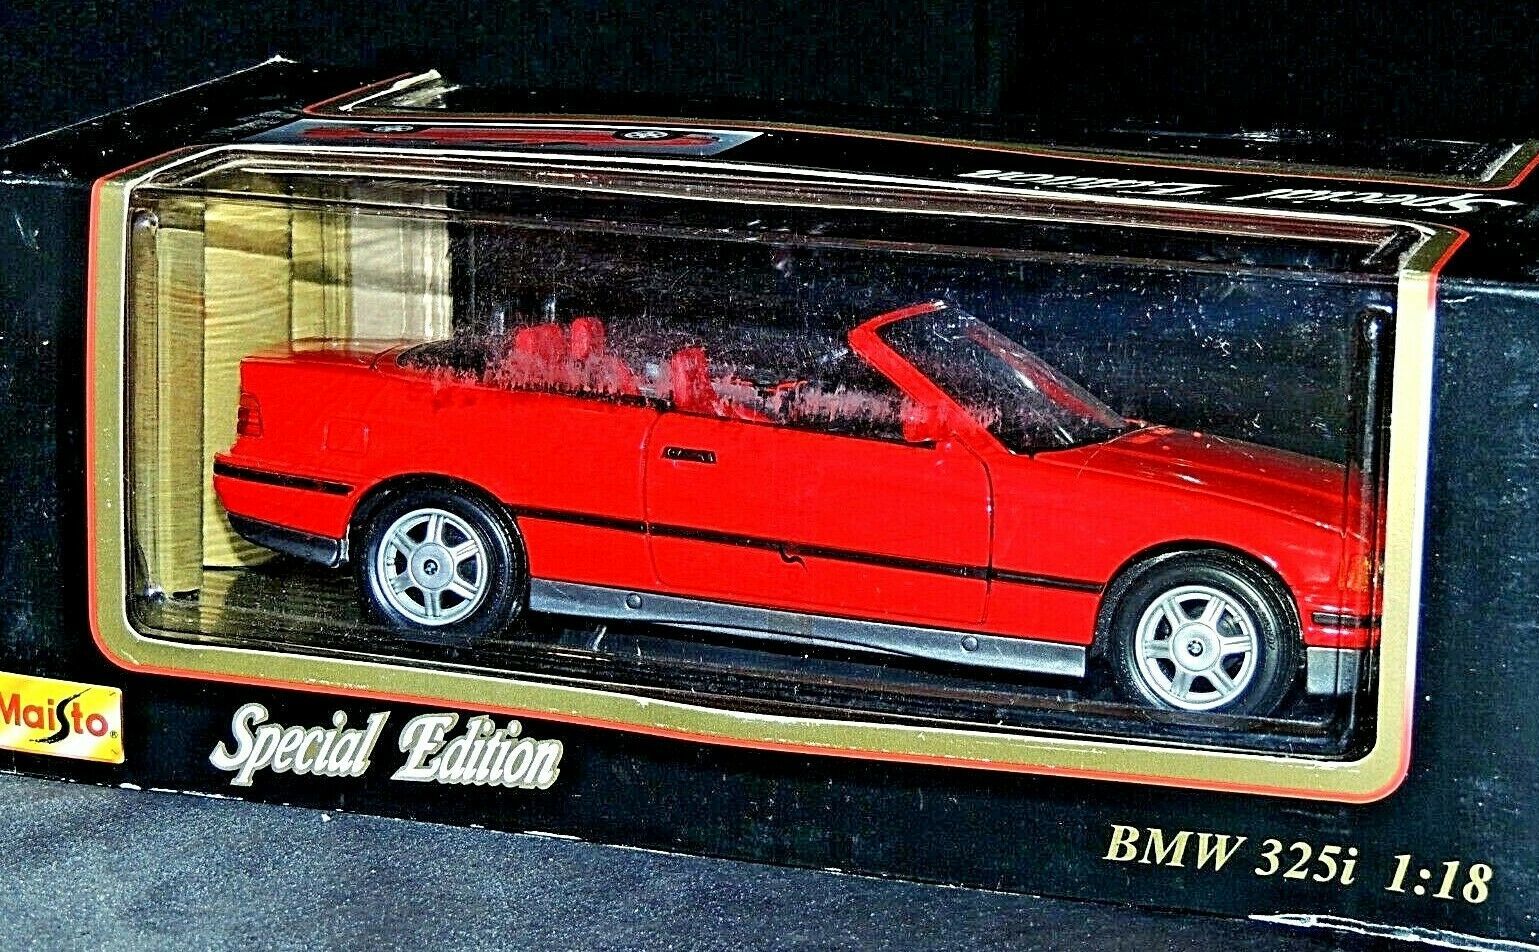 Primary image for BMW 325I Convertible Maisto Special Edition 1:18 AA20-7553 Vintage Collectibles